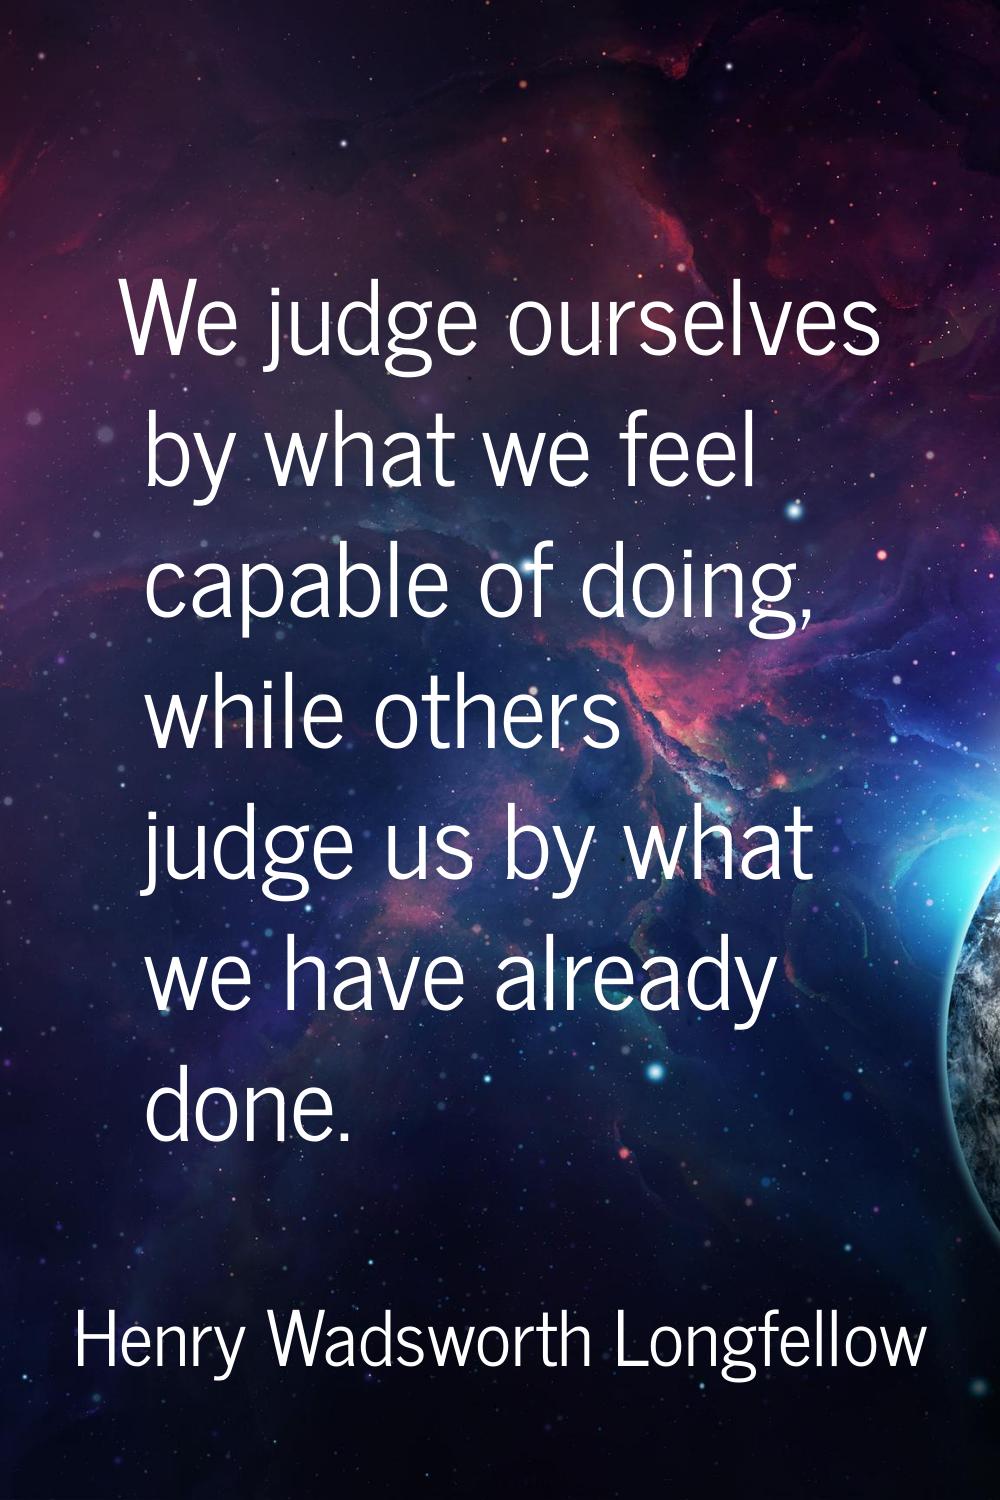 We judge ourselves by what we feel capable of doing, while others judge us by what we have already 